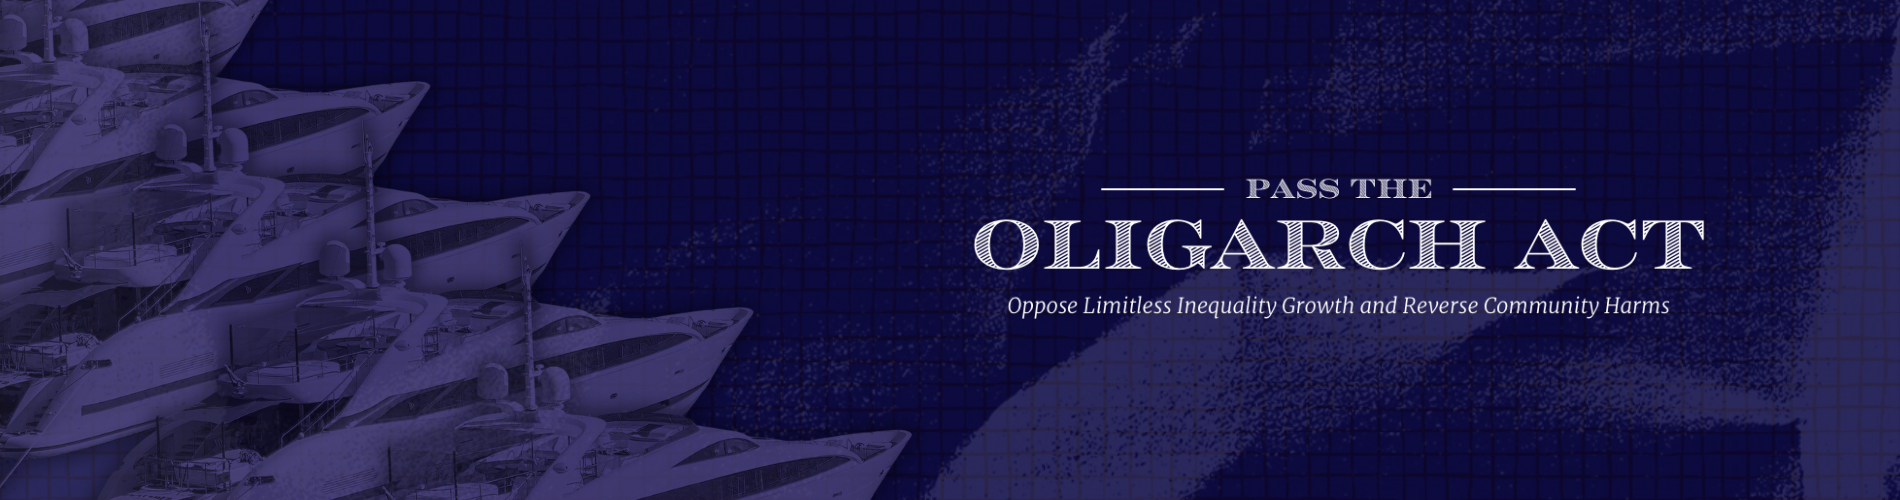 OLIGARCH Act Logo (1)